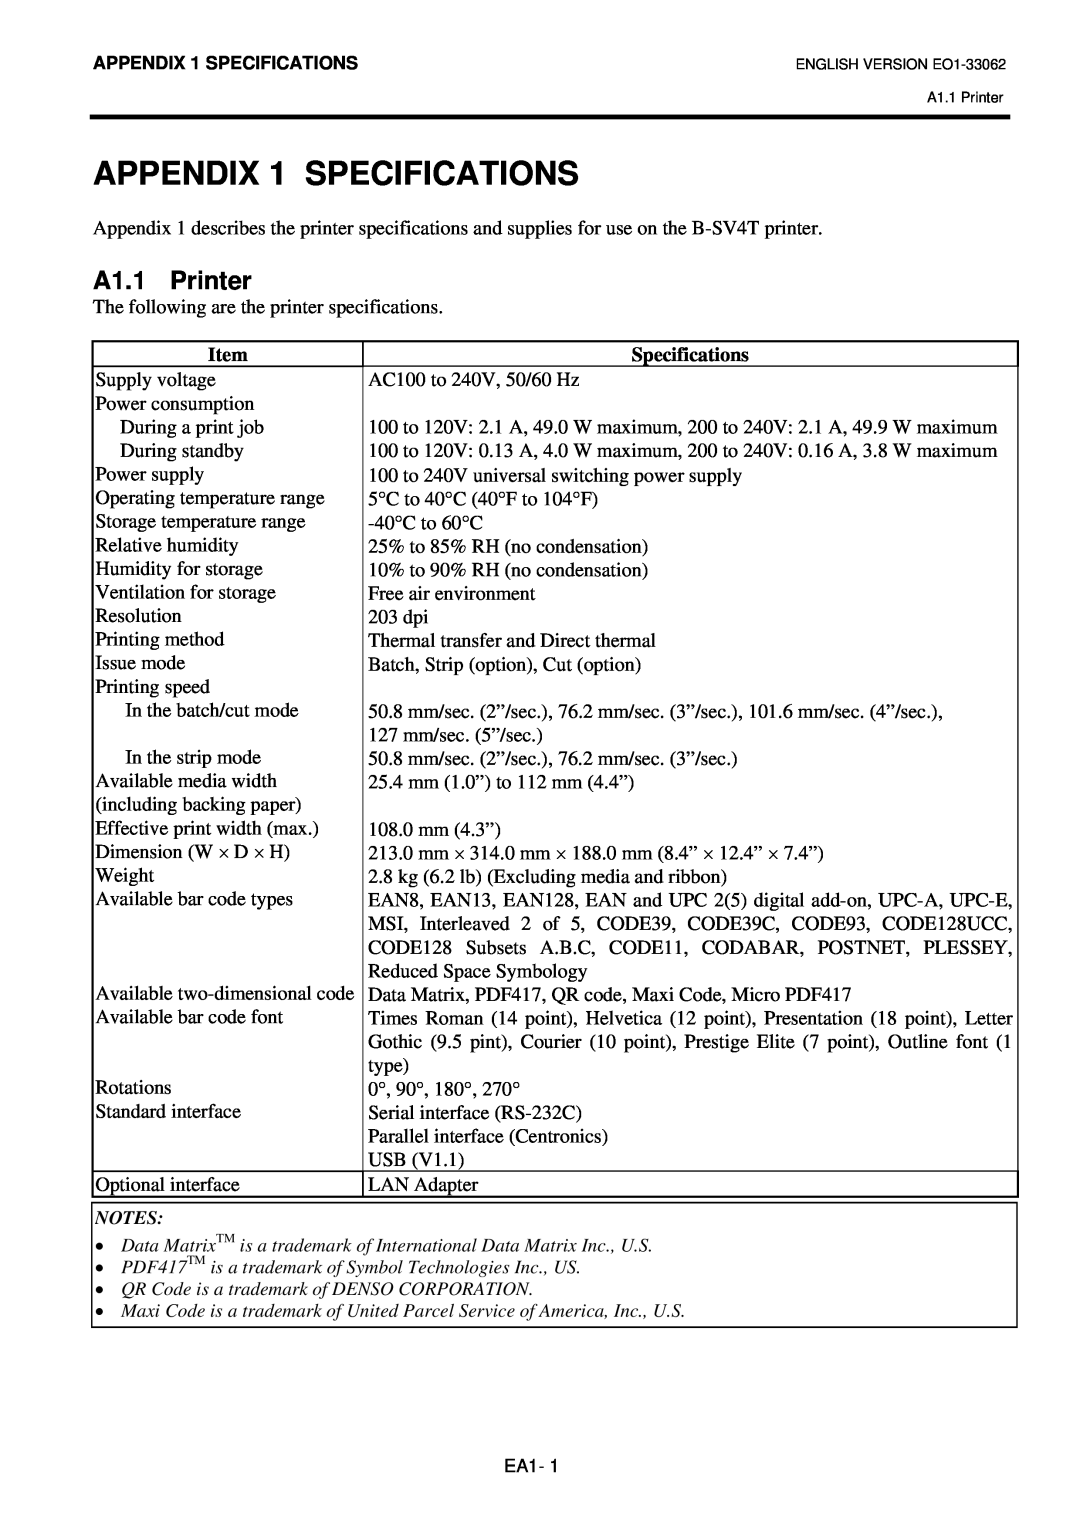 Toshiba B-SV4T owner manual APPENDIX 1 SPECIFICATIONS, A1.1 Printer, Specifications 